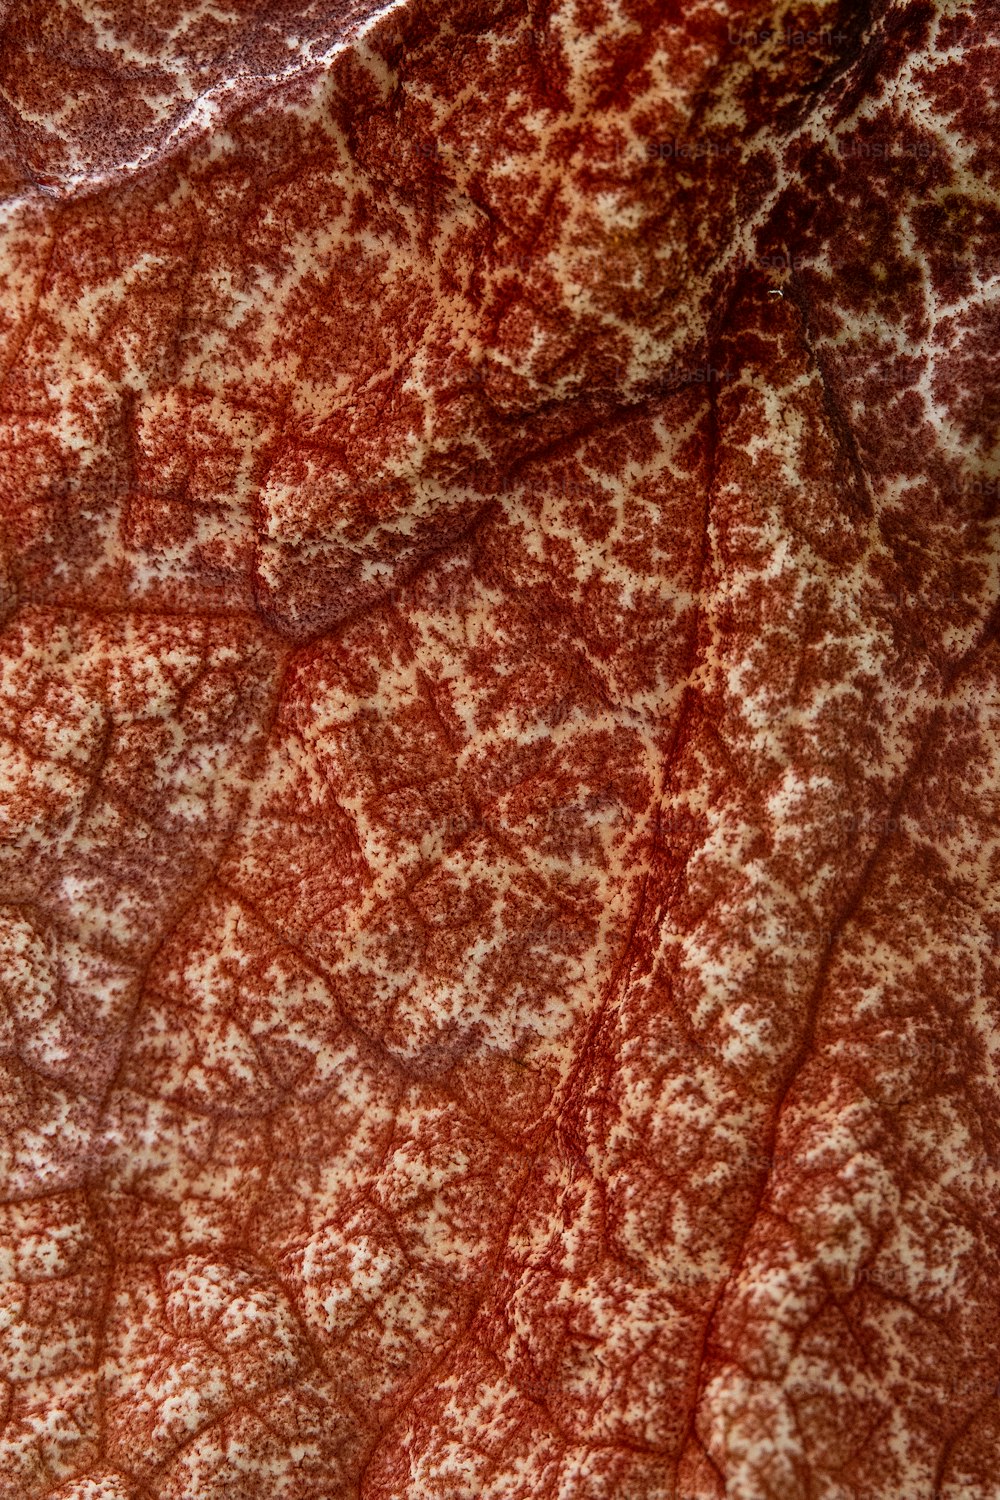 a close up of a red and white leaf